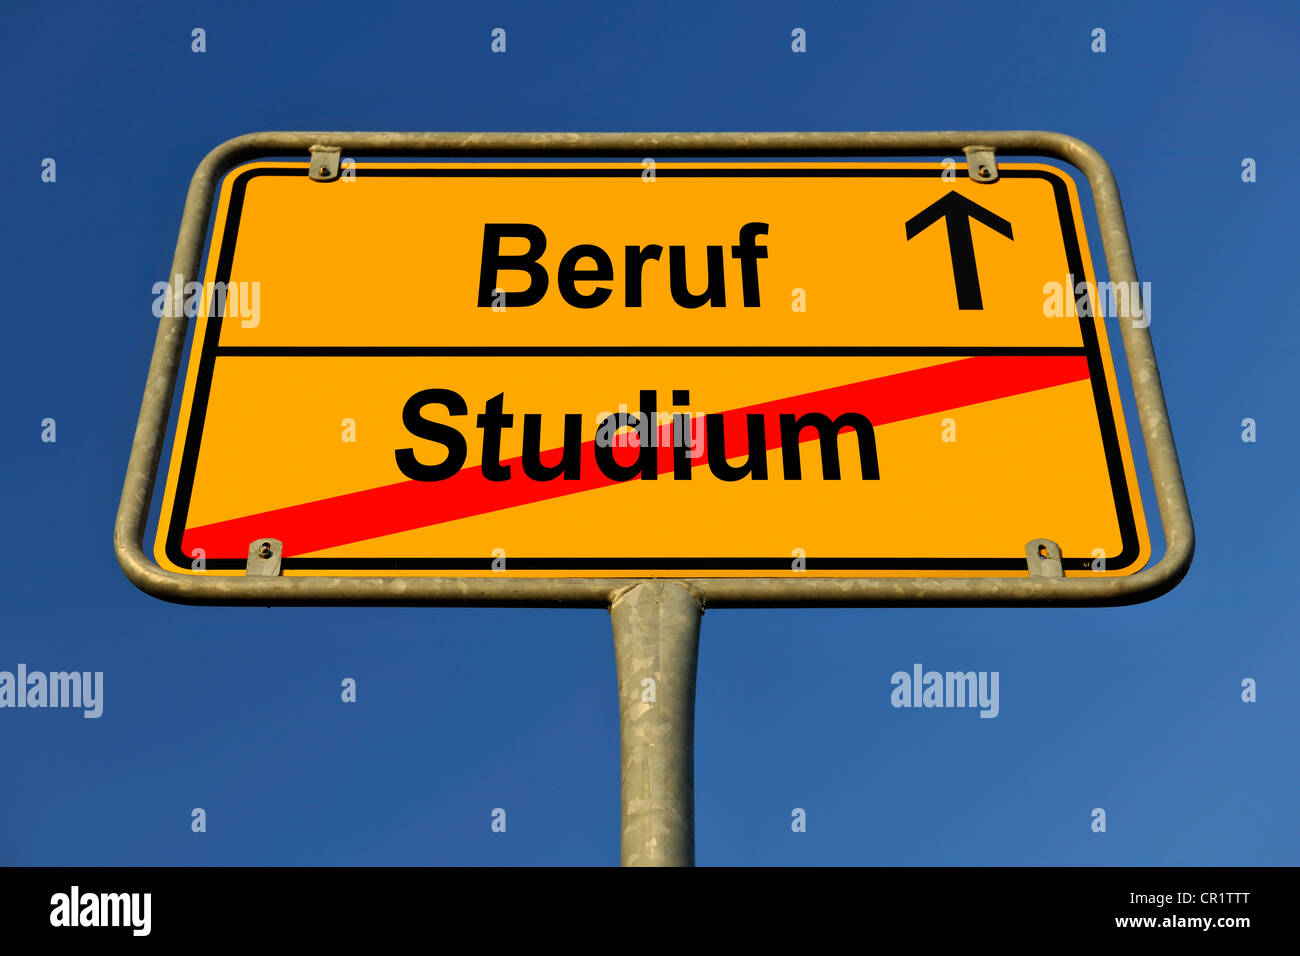 Sign, city limit, symbolic image for the transition from Studium or academic studies to Beruf or work Stock Photo